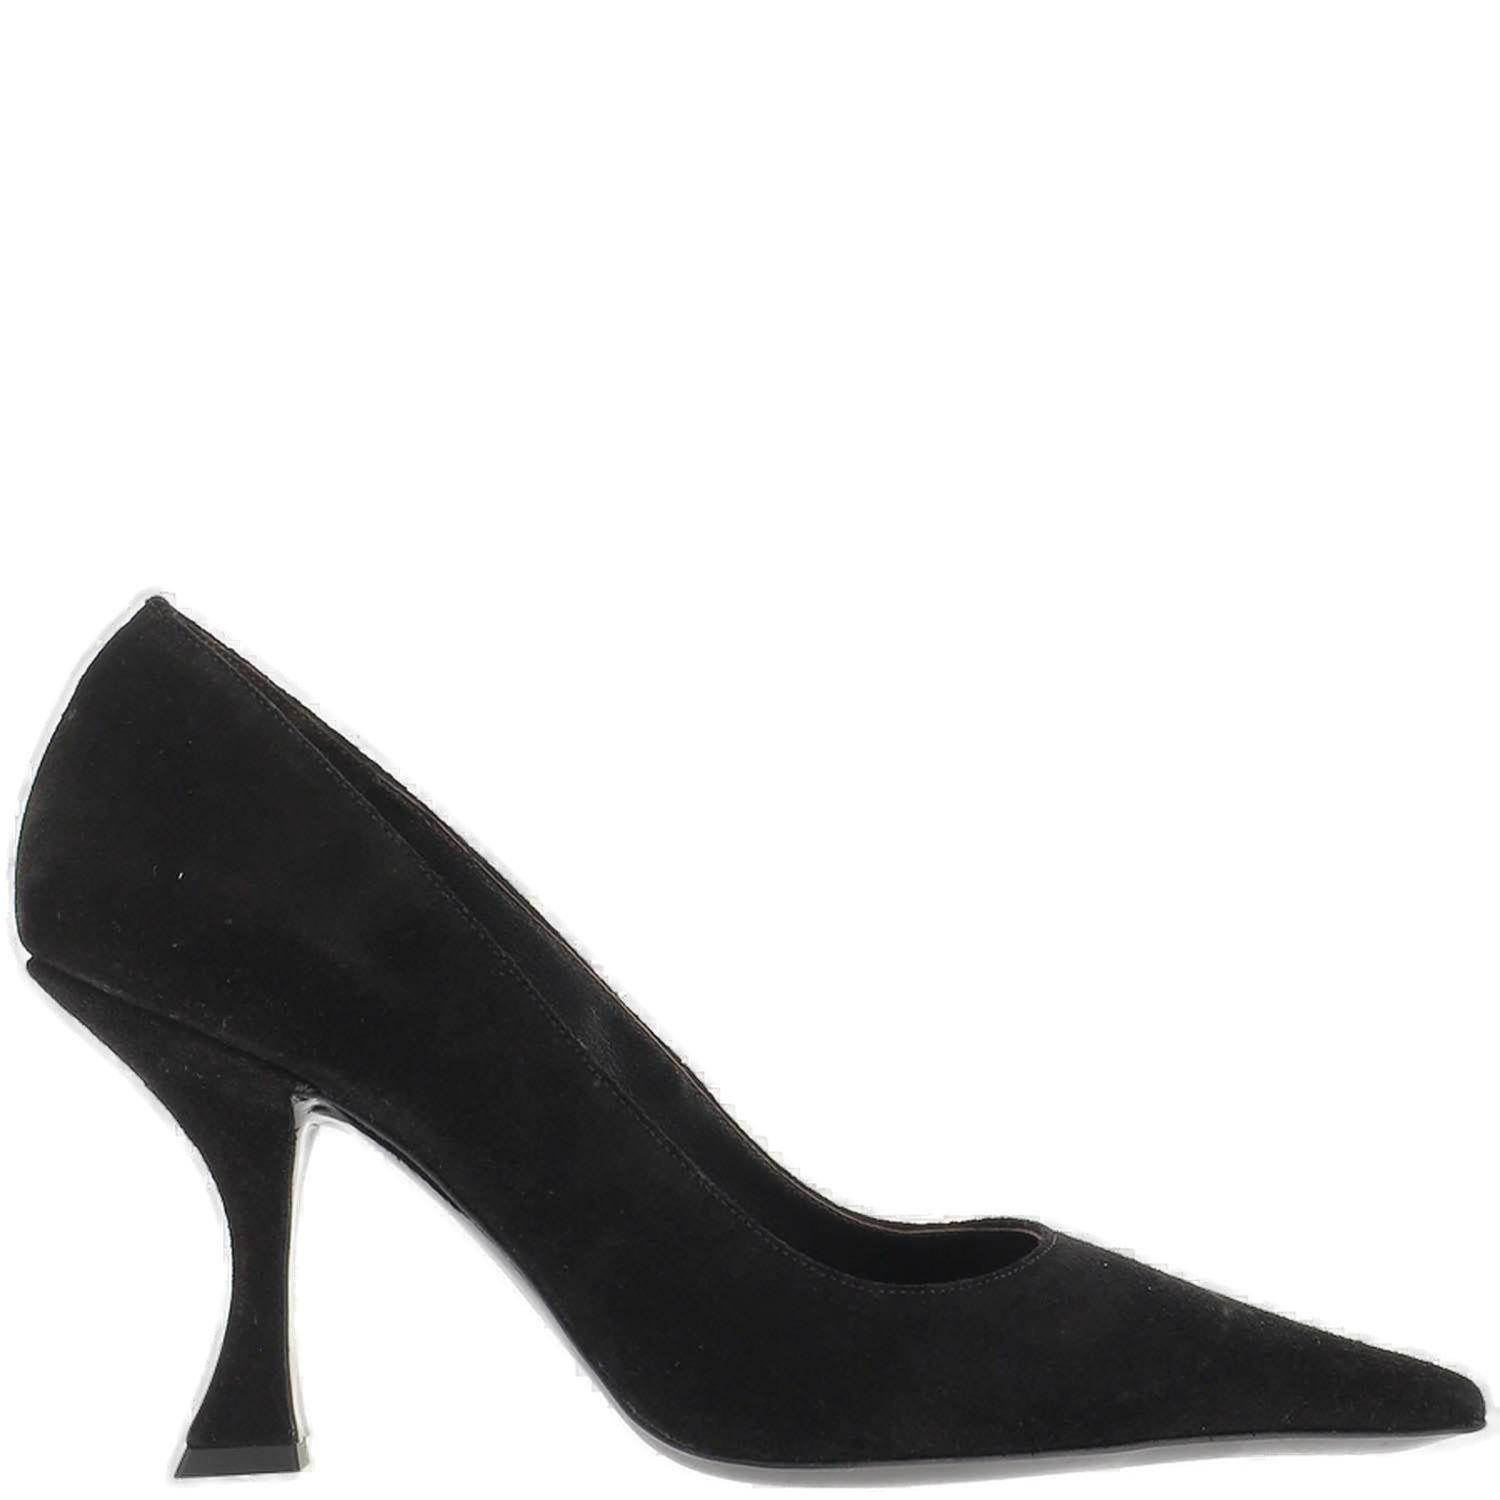 BY FAR Viva Pointed-toe Pumps